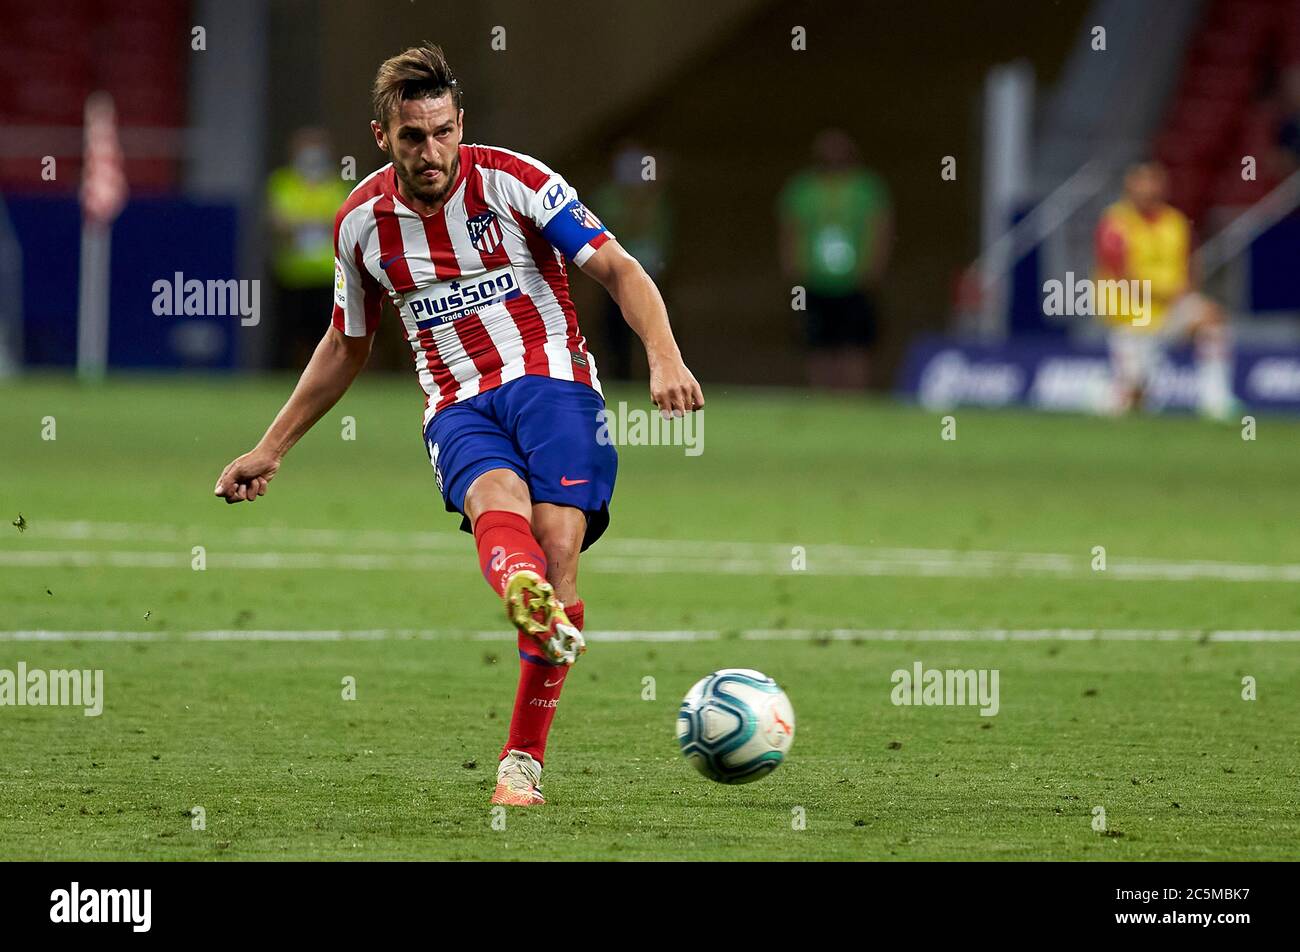 Madrid, Spain. 03rd July, 2020. Koke Resurreccion (Atletico de Madrid) seen in action during the La Liga match round 34 between Atletico de Madrid and RCD Mallorca at Wanda Metropolitano Stadium in Madrid.(Final score; Atletico de Madrid 3:0 RCD Mallorca) Credit: SOPA Images Limited/Alamy Live News Stock Photo